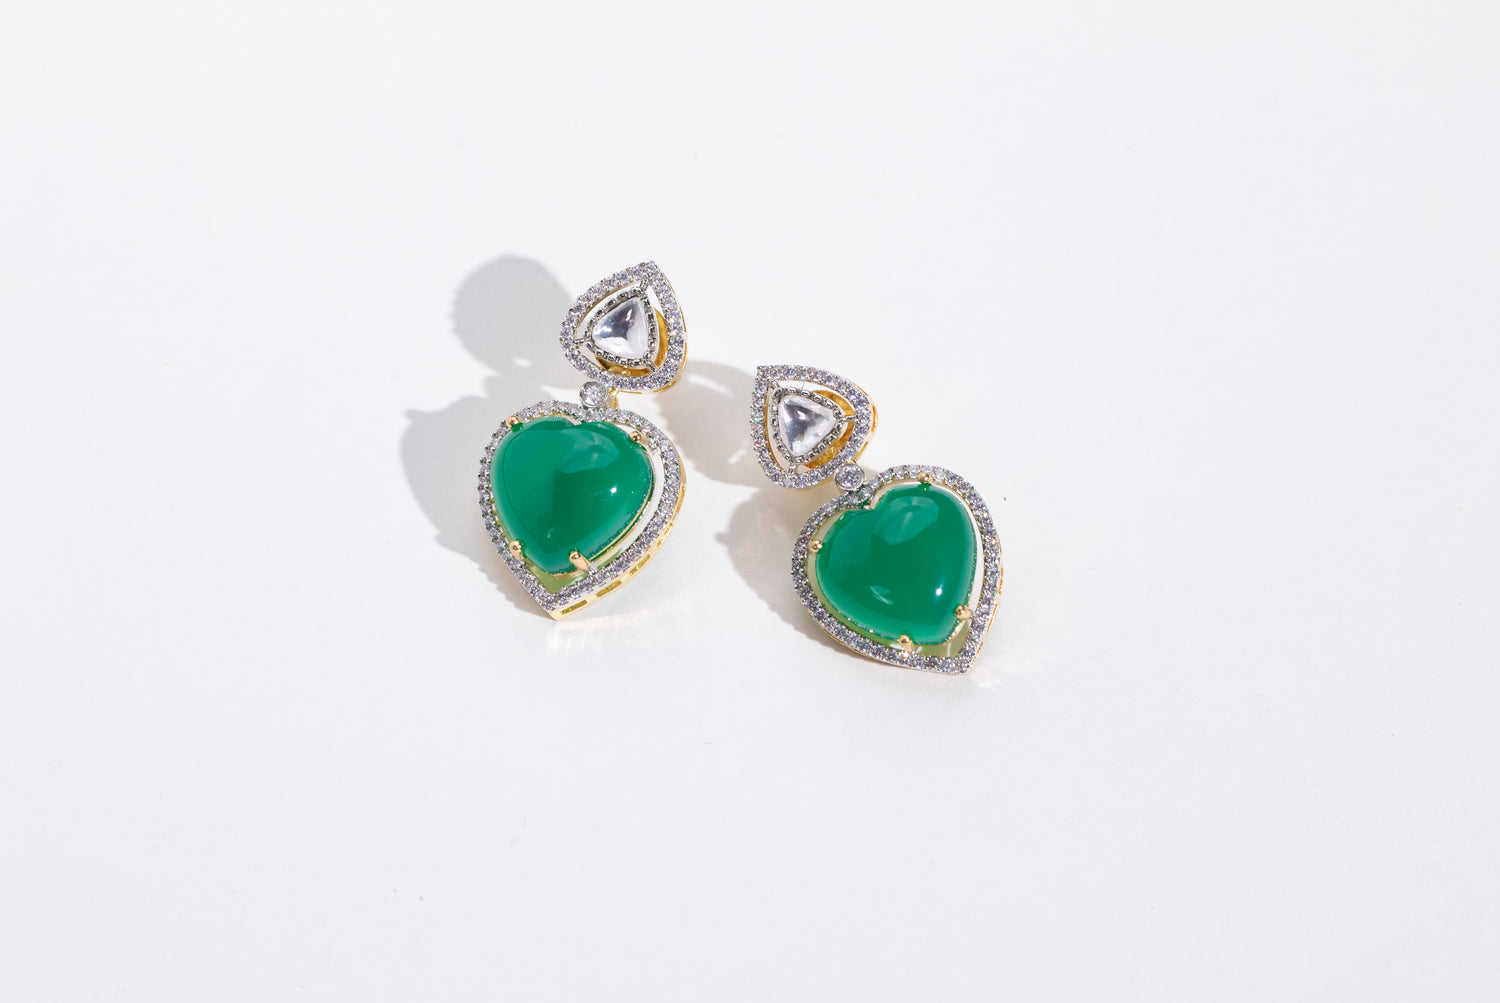 Stylish Heart Shaped Swarovski Earrings: Elevate your style with these trendy earrings for women." "Statement Piece: Heart Shaped Emerald and Swarovski Earrings: Make a fashion statement with these stylish earrings." "Versatile Heart Shaped Earrings: Perfect for any outfit, these earrings are a must-have for every fashionista." "Fashionable Heart Shaped Emerald Earrings: Complete your look with these trendy earrings, perfect for all occasions